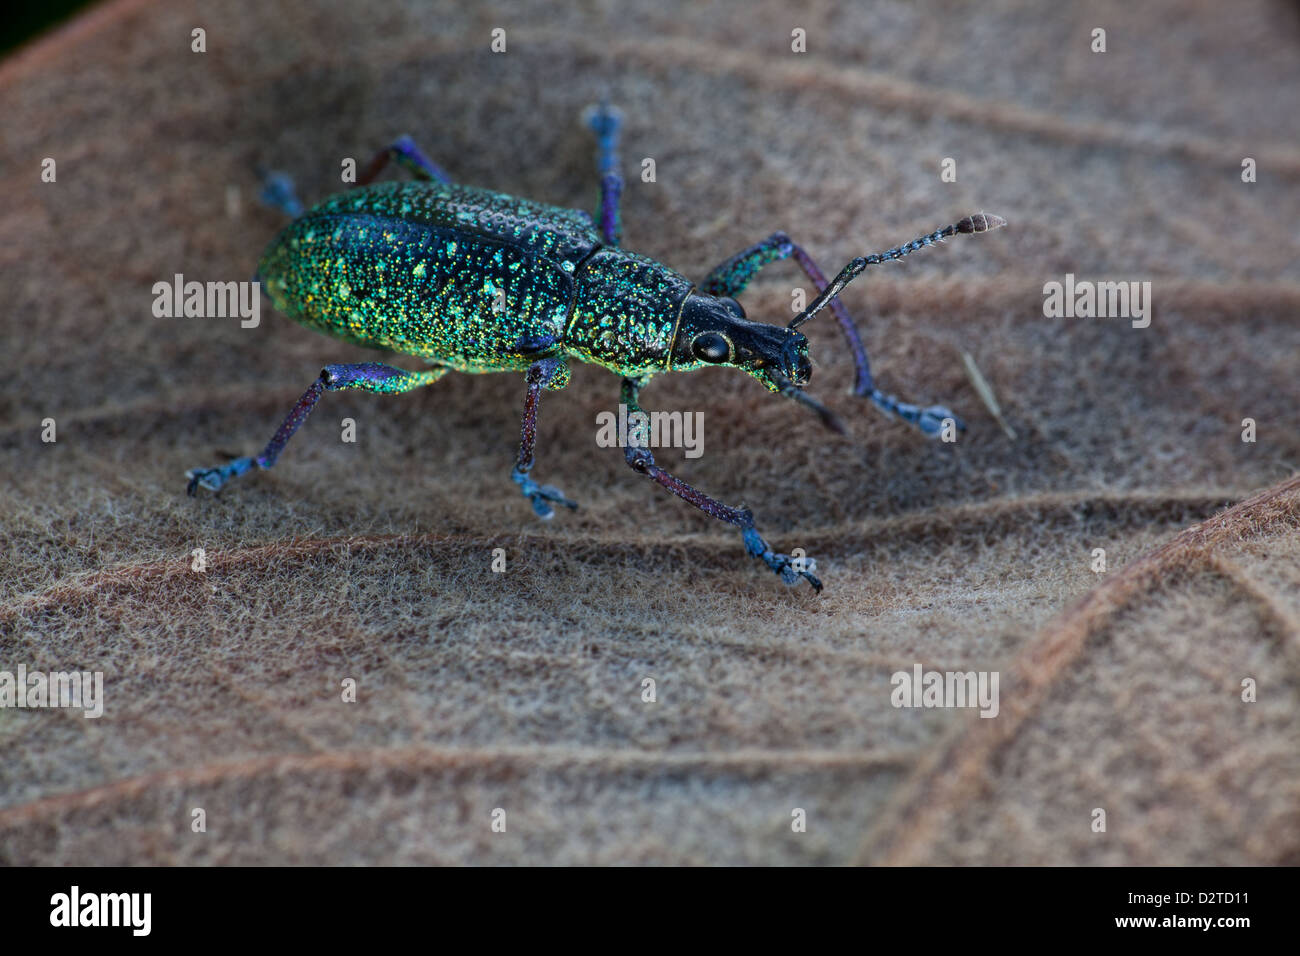 Weevil beetle in a leaf at Burbayar, Panama province, Republic of Panama. Stock Photo